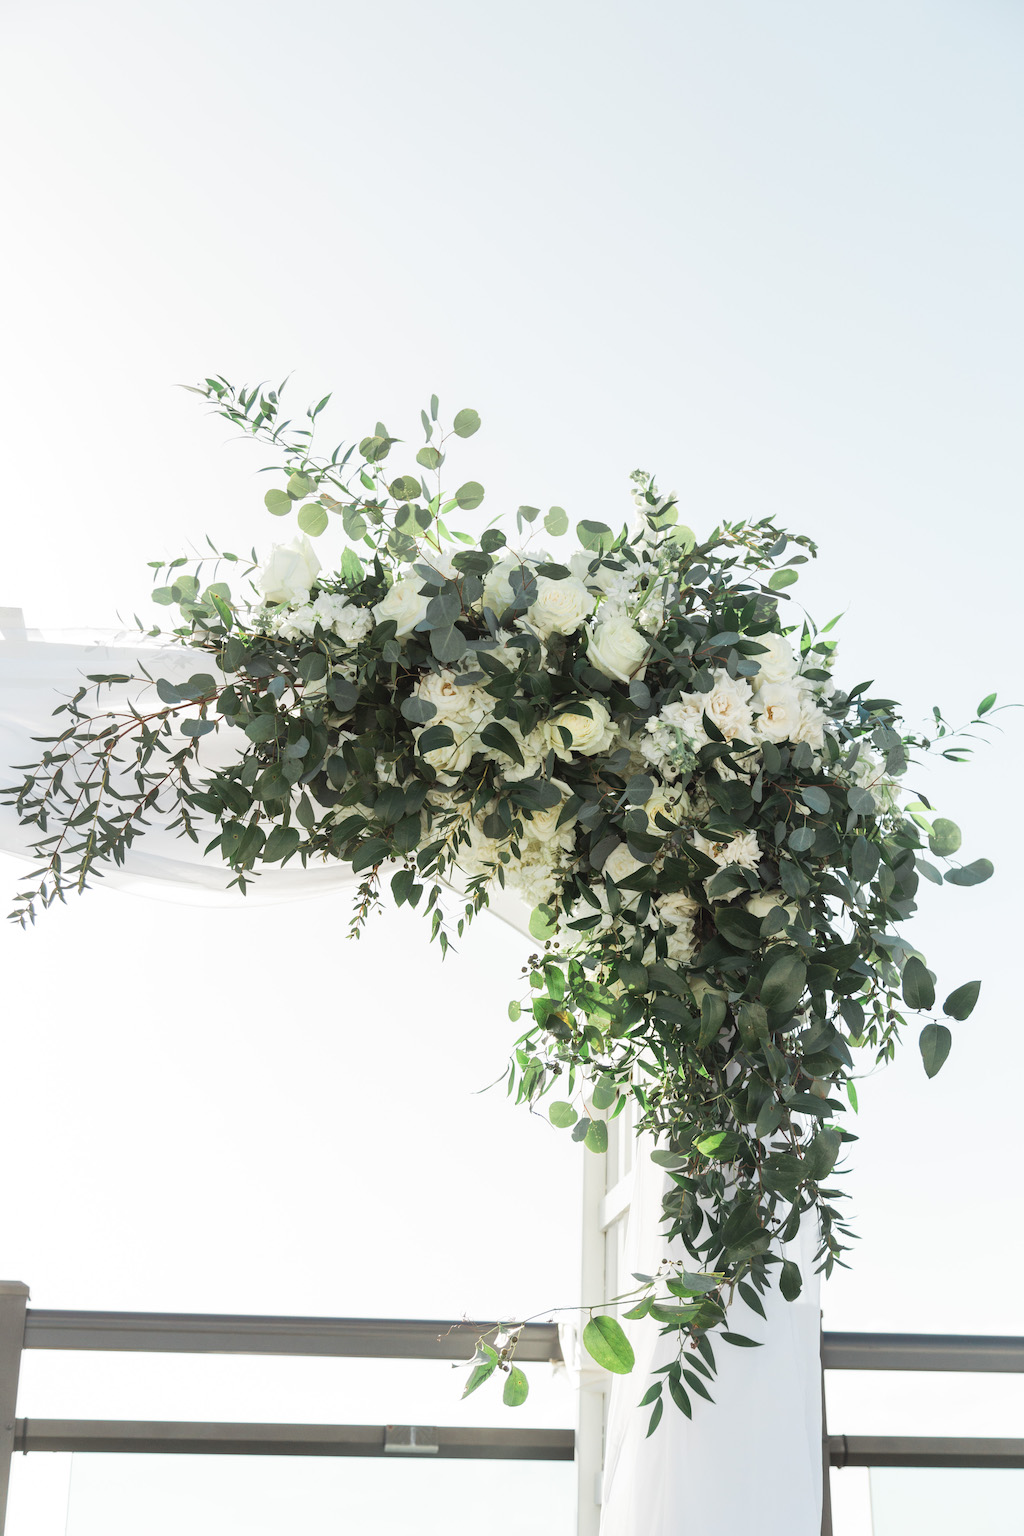 Rustic, Romantic Inspired Wedding Ceremony Decor, Organic White, Ivory and Greenery Floral Arrangement on Arch